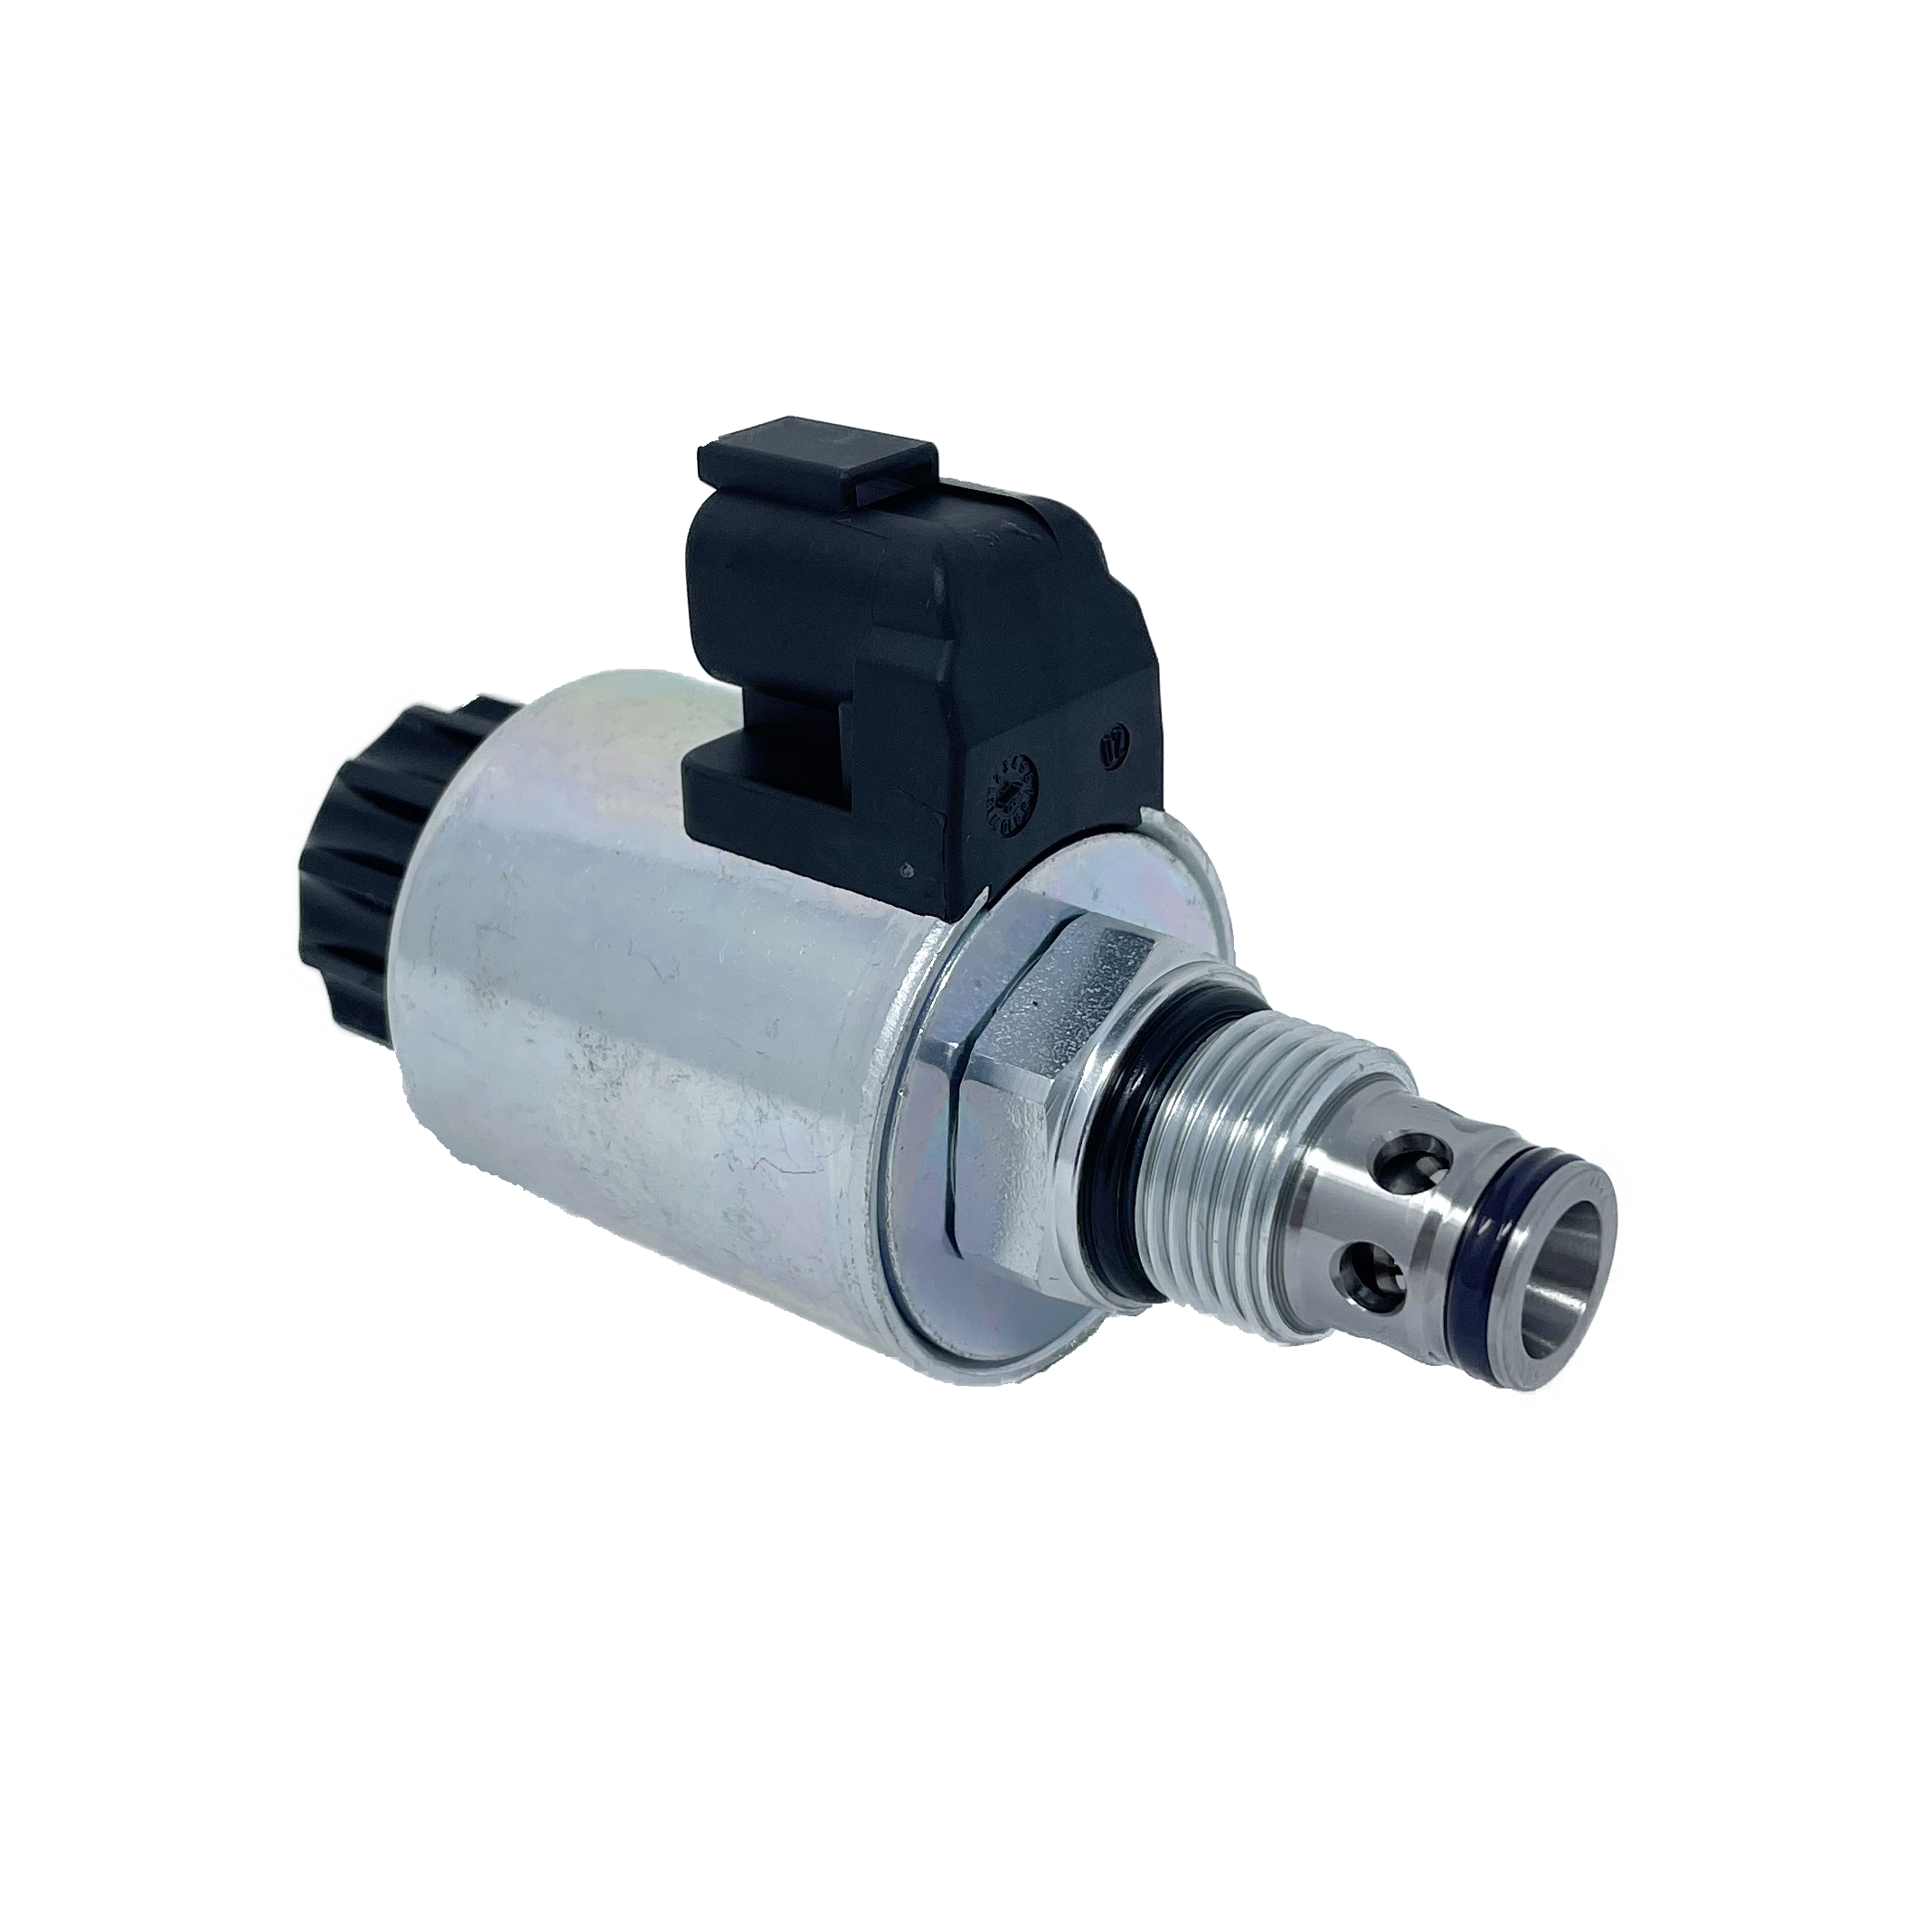 SD3E-B2/H2O2A24DT : Argo DCV, 16GPM, 5100psi, 2P2W, C-10-2, 24 VDC Deutsch, Flow 1 to 2 Neutral